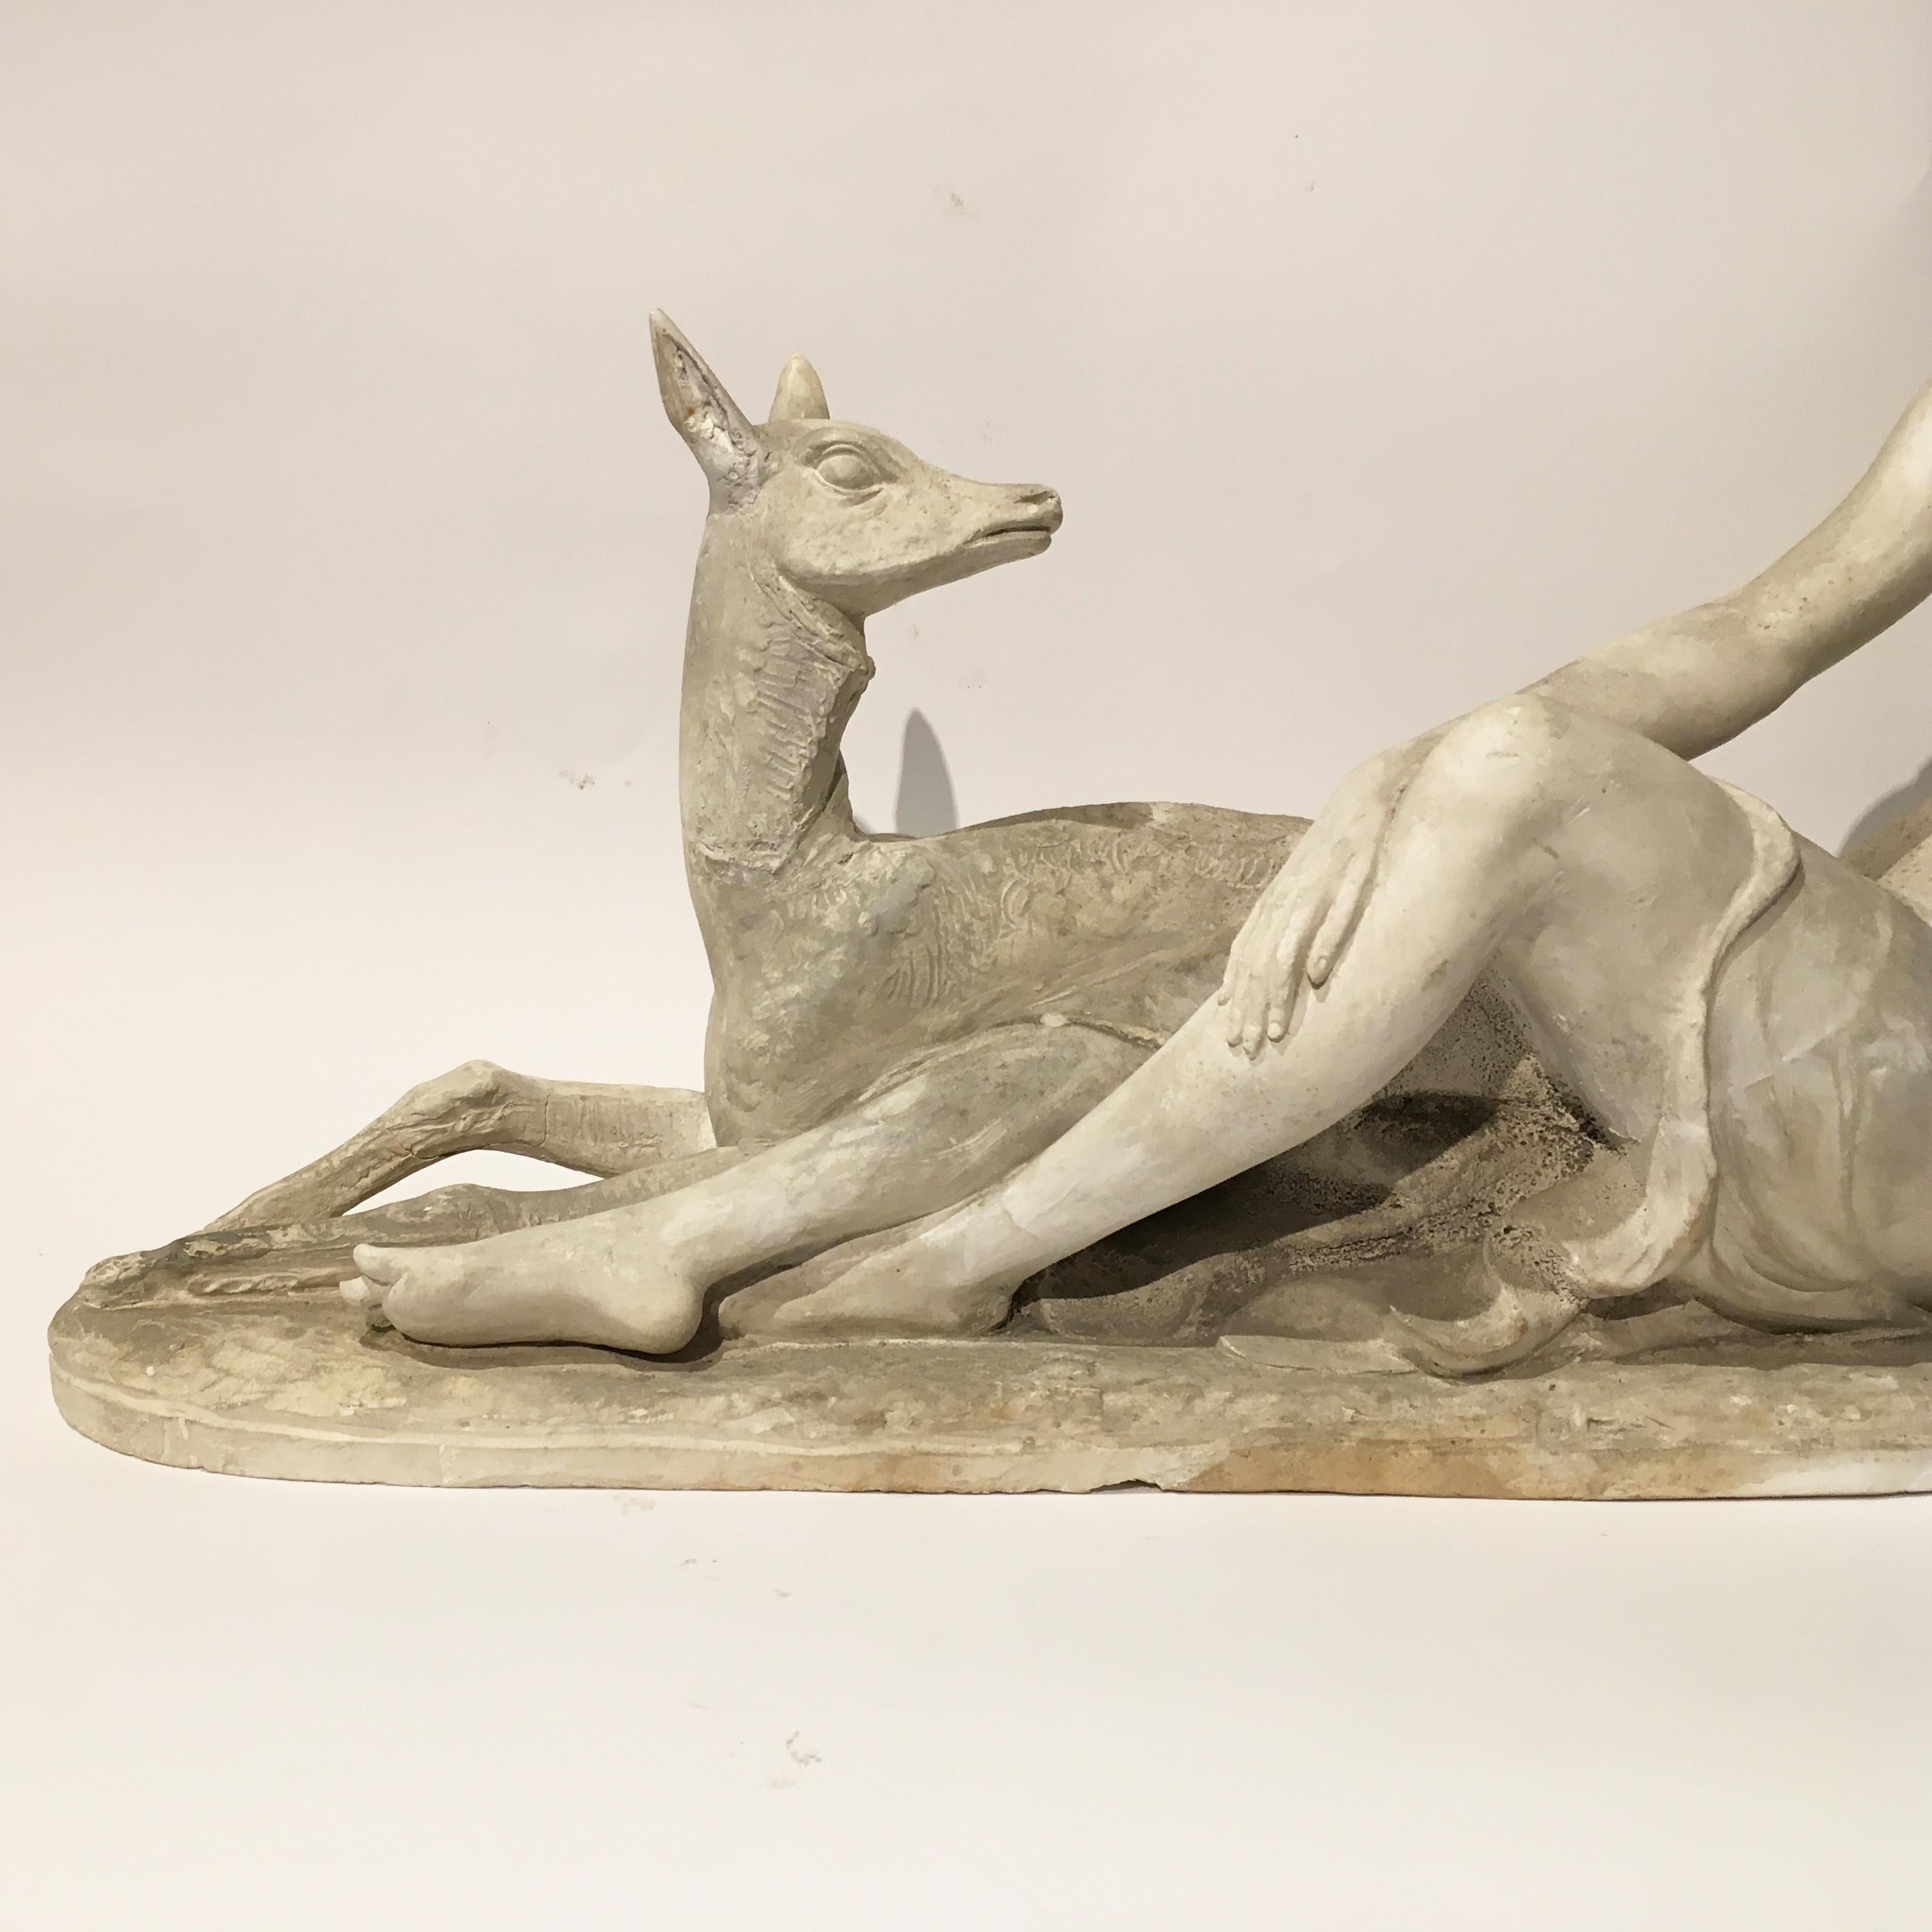 Early 20th Century Italian Art Deco Plaster Sculpture by Mario Bandini In Good Condition For Sale In Firenze, Tuscany